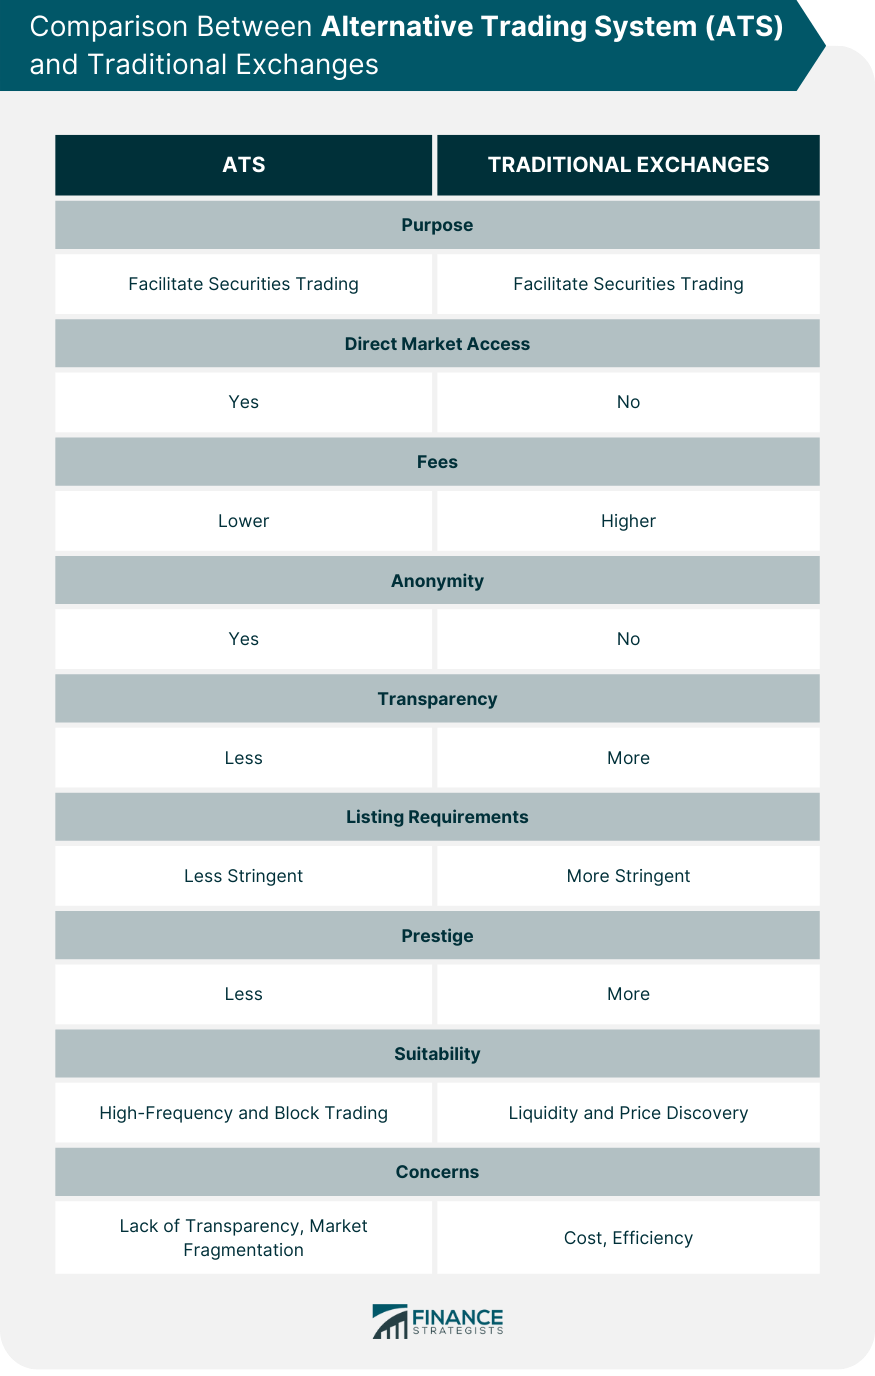 Comparison Between Alternative Trading System (ATS) and Traditional Exchanges